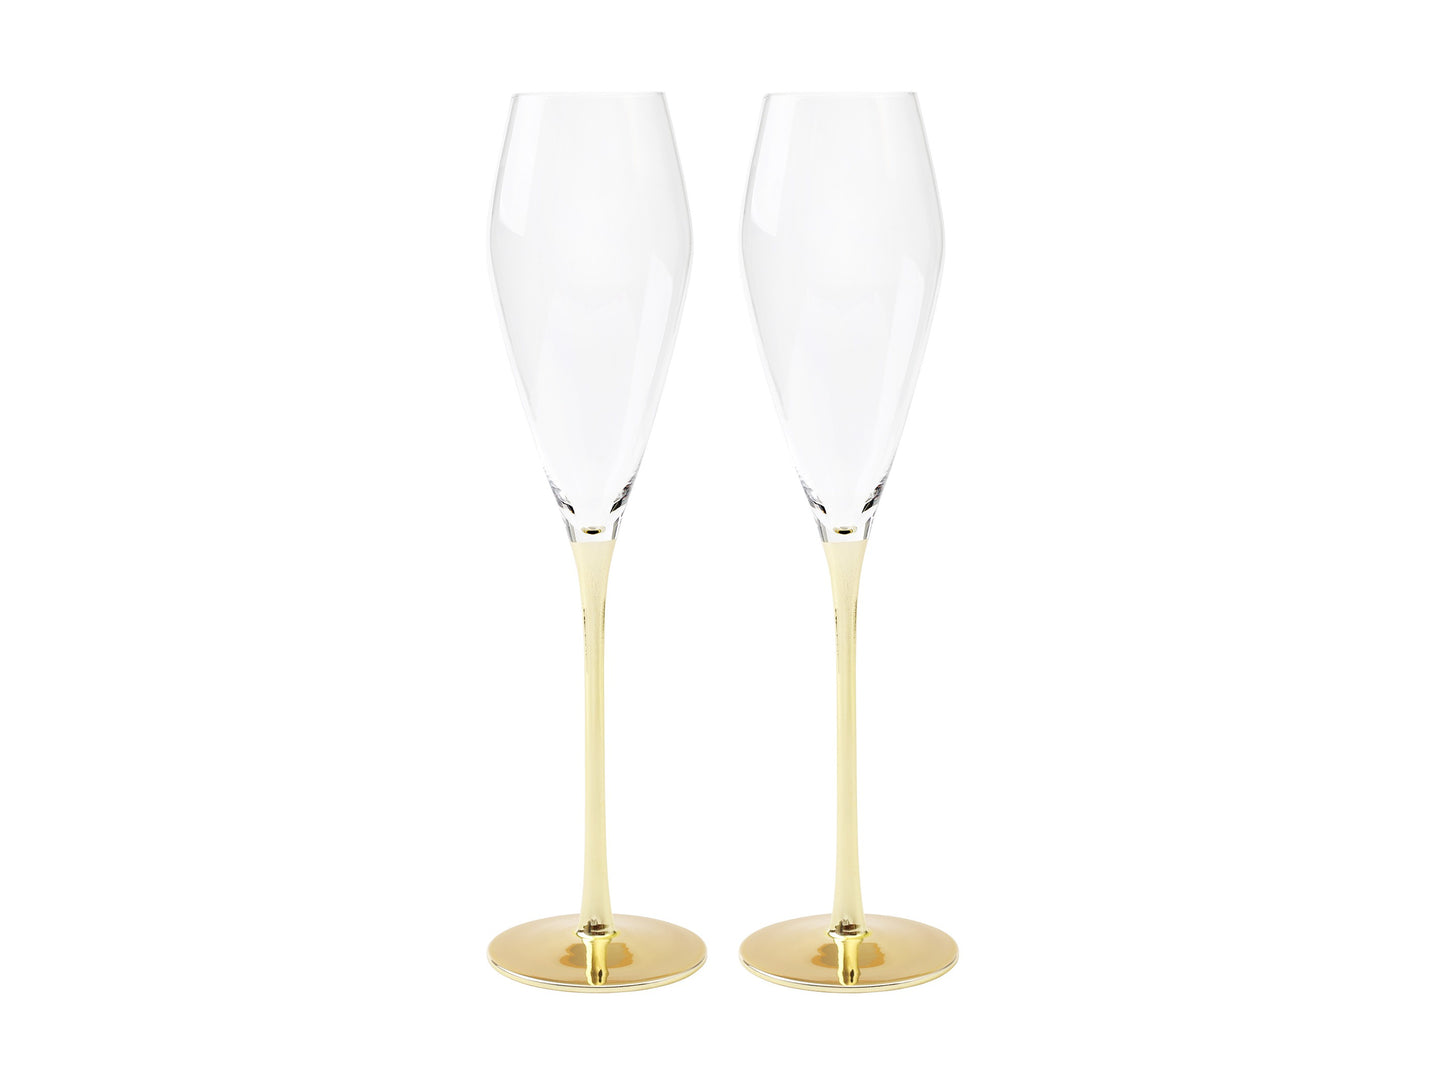 Everleigh Prosecco Glass 250ML Set of 2 Gold